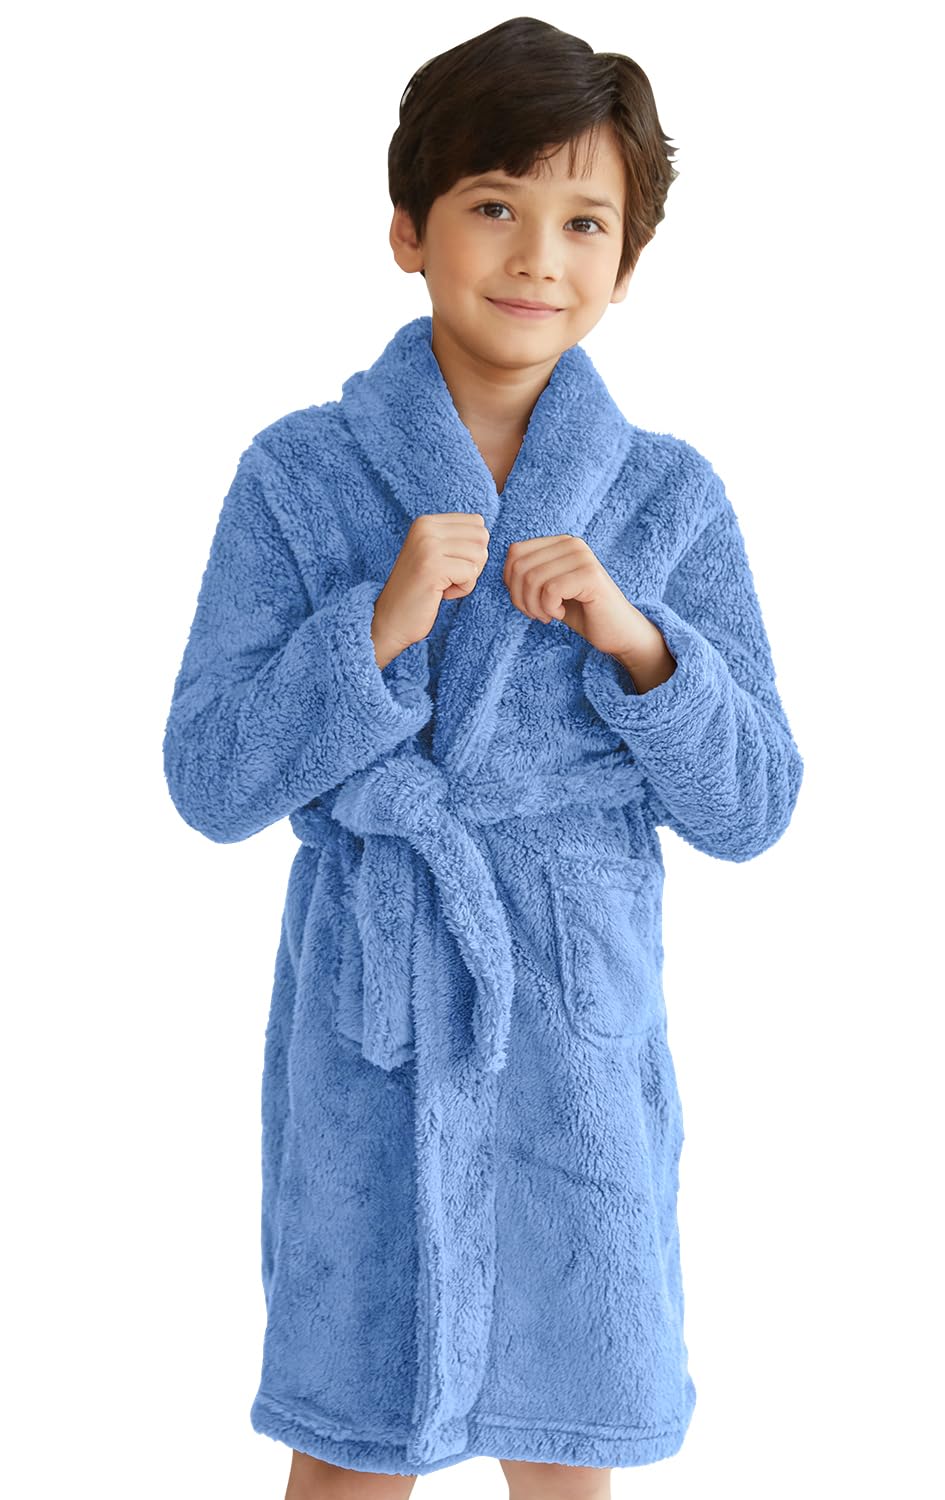 BAYRTIC Kids Flannel Wraps Towel, Toddler Soft Cover-Up for Kids 6-7 Years